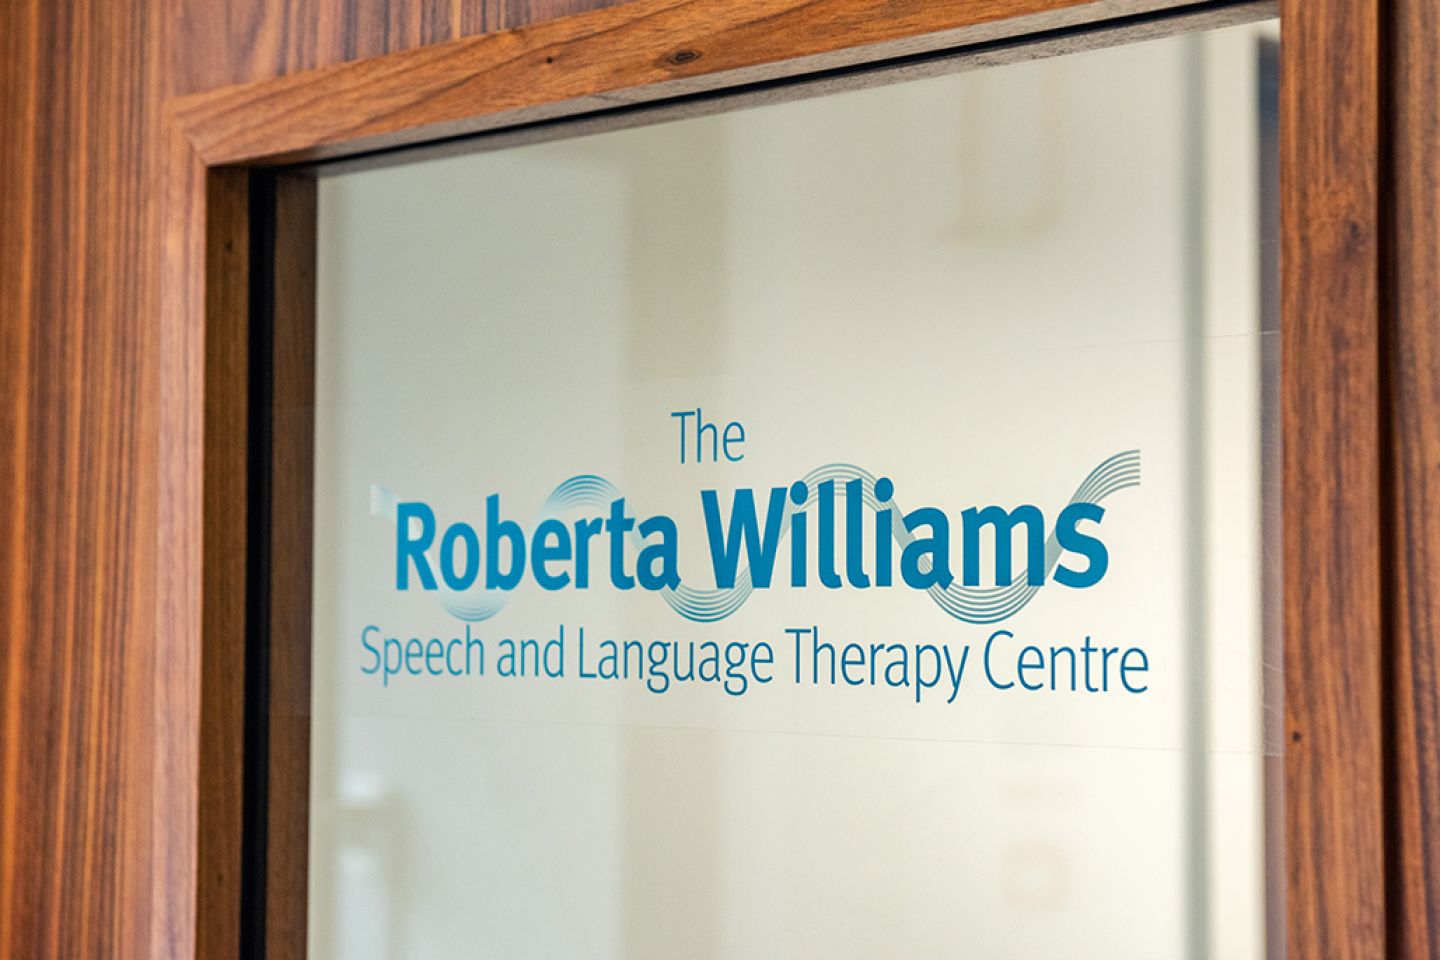 Roberta Williams speech and language therapy centre signage